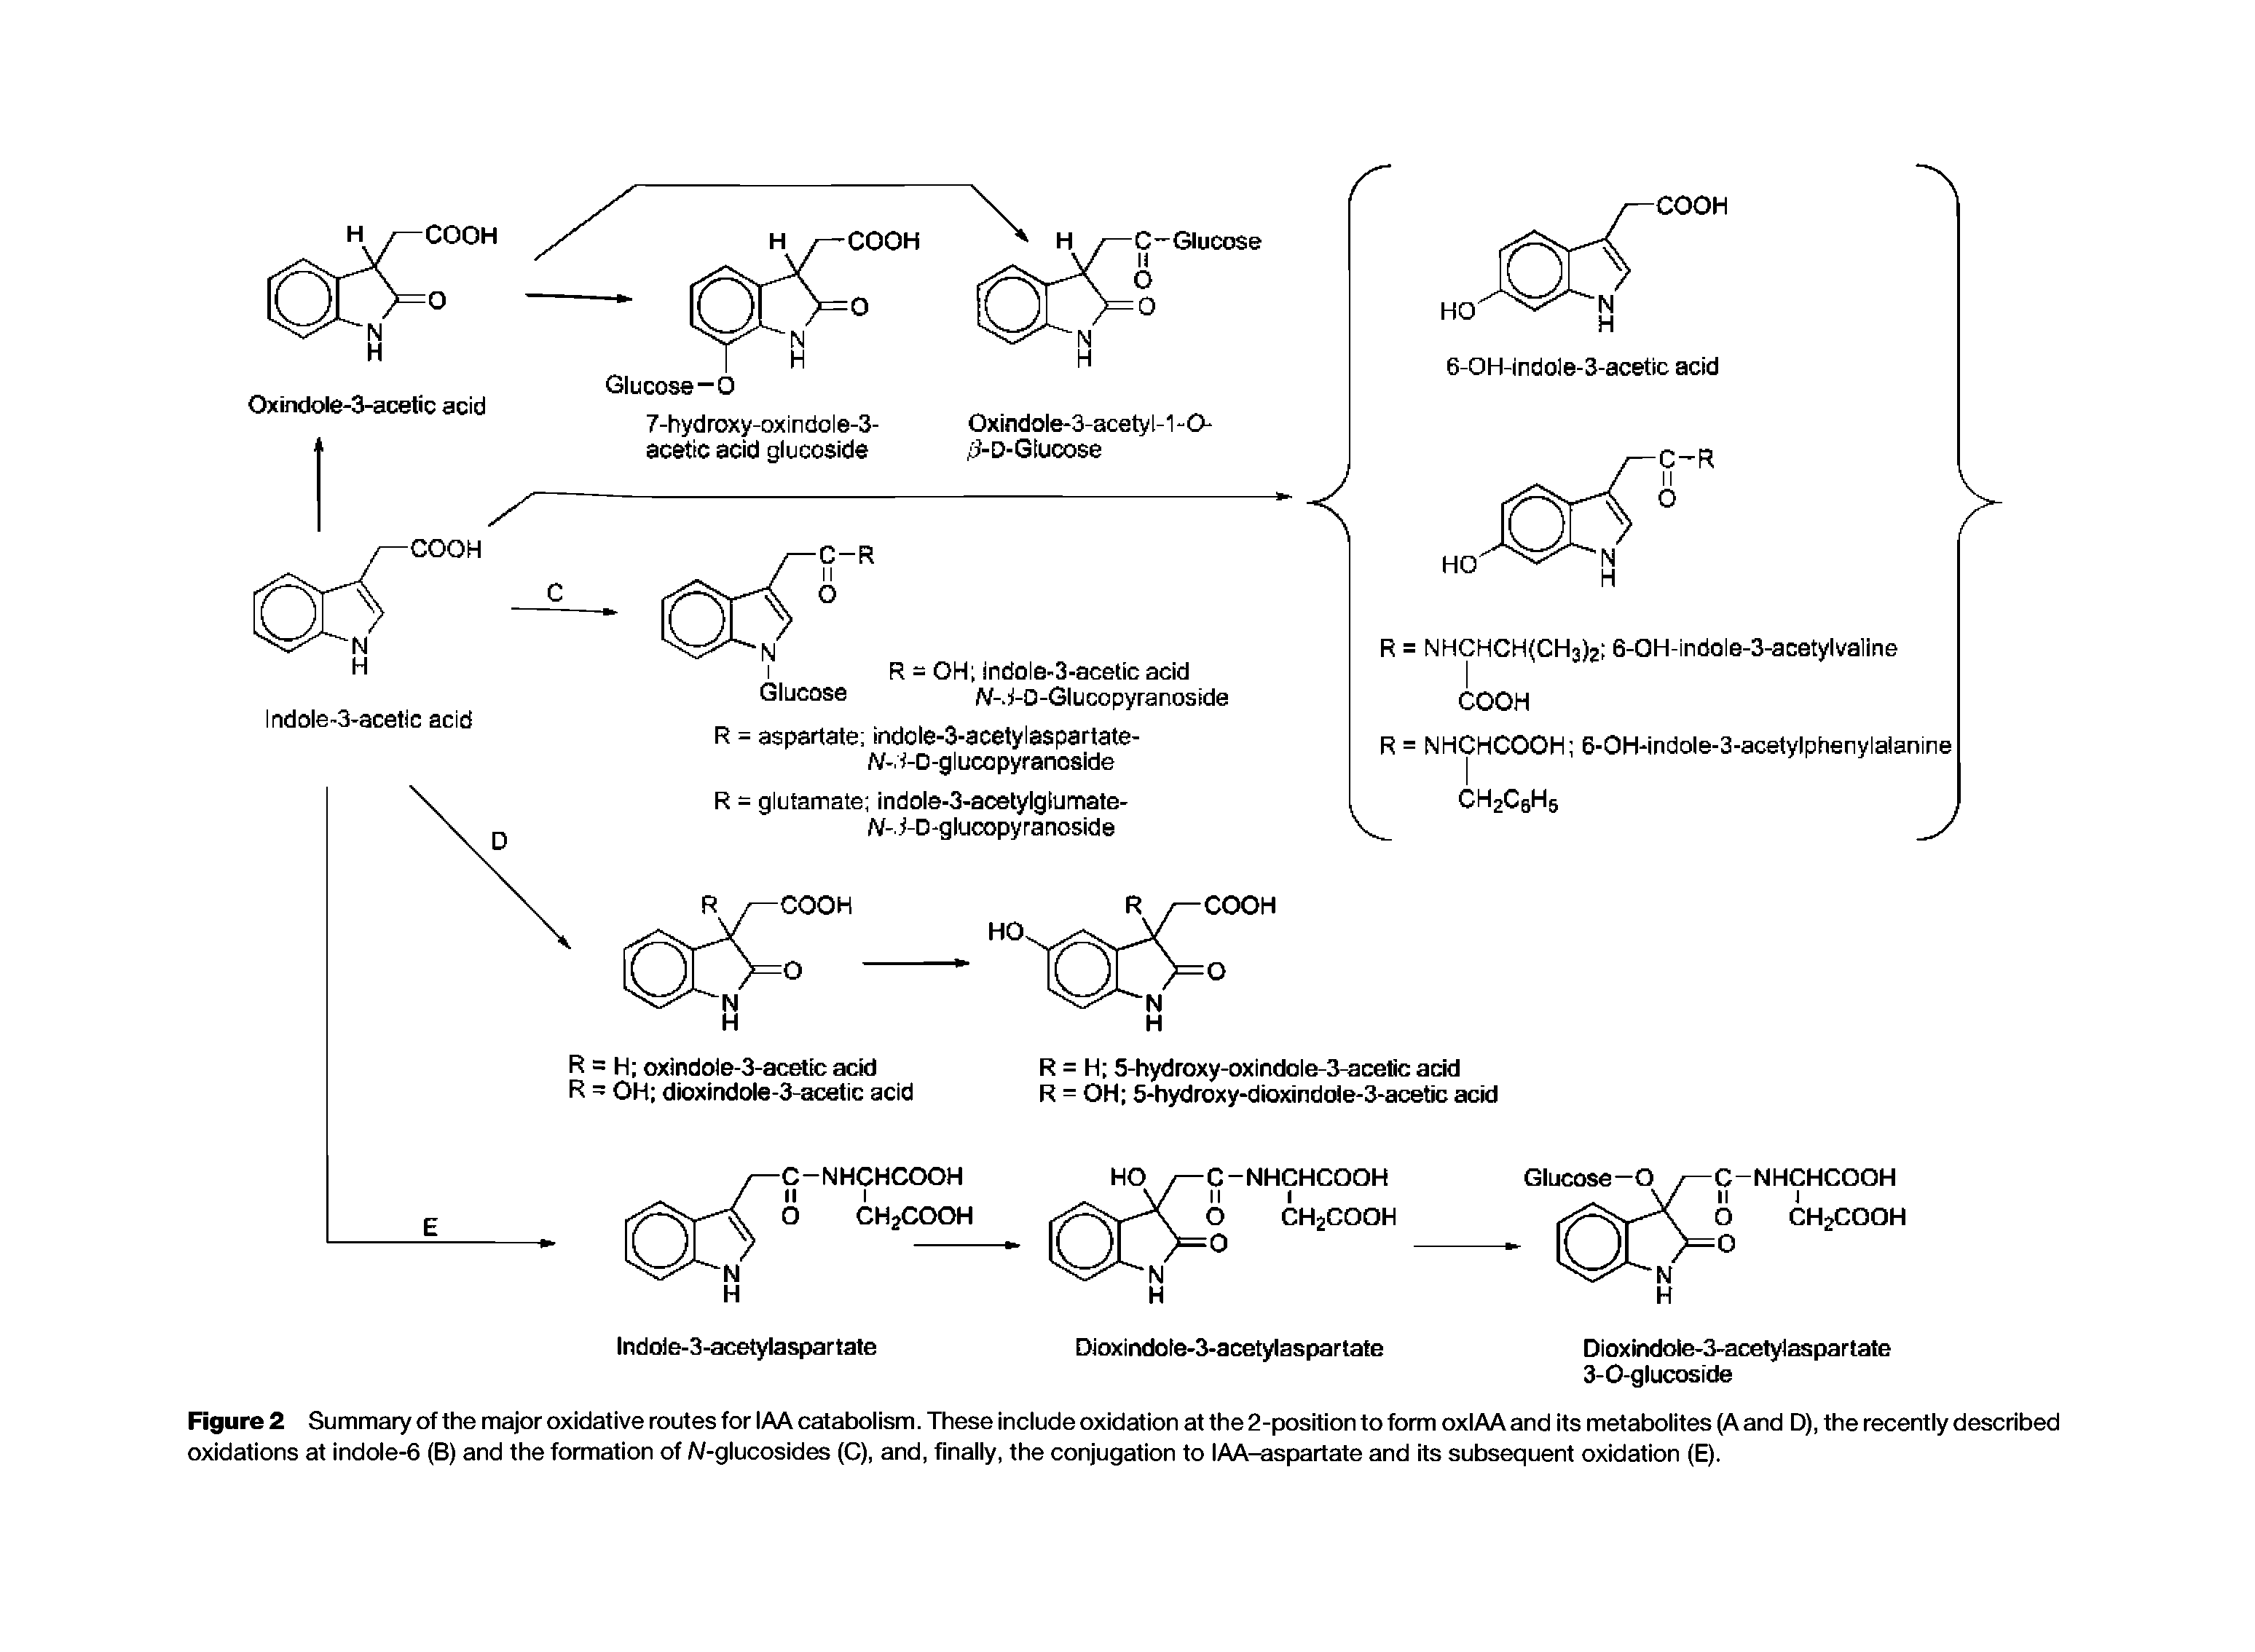 Figure 2 Summary of the major oxidative routes for IAA catabolism. These include oxidation at the 2-position to form oxIAA and its metabolites (A and D), the recently described oxidations at indole-6 (B) and the formation of N-glucosides (C), and, finally, the conjugation to lAA-aspartate and its subsequent oxidation (E).